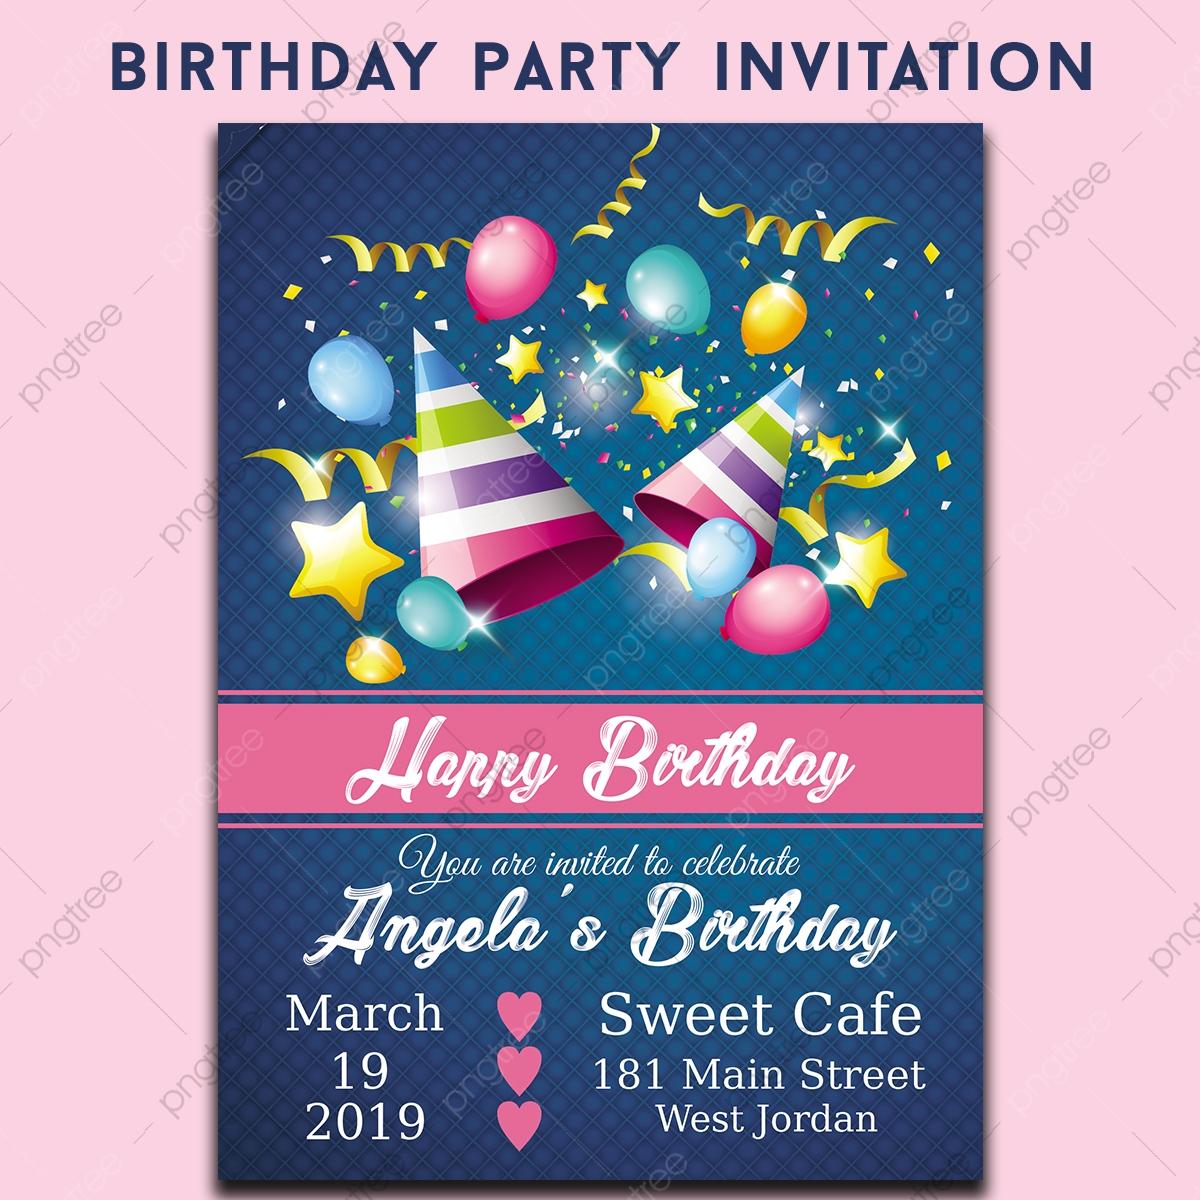 Birthday Invitation PNG, Vector, PSD, and Clipart With Transparent  Background for Free Download